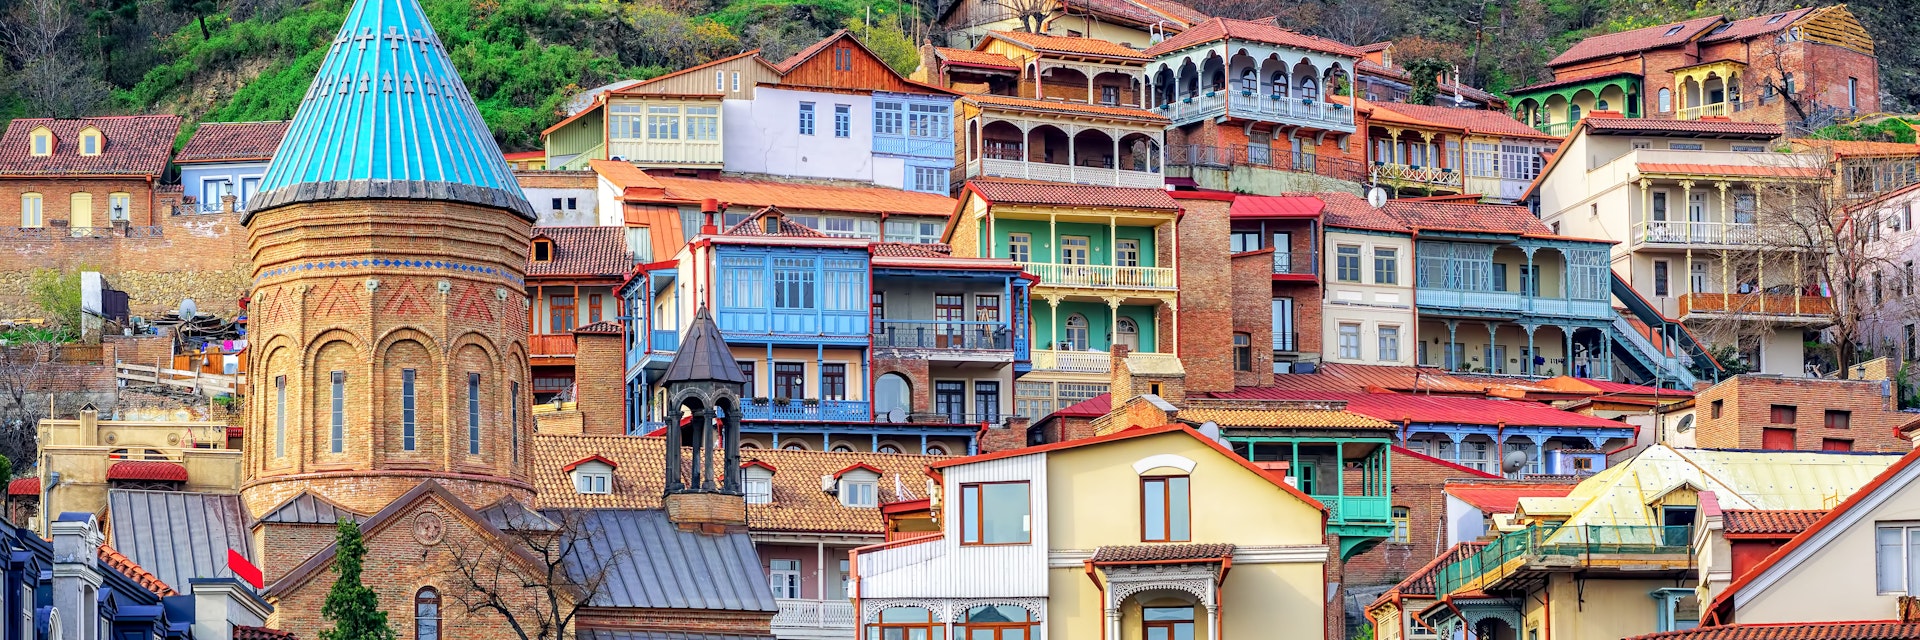 Colourful traditional houses with wooden carved balconies in the Old Town of Tbilisi.